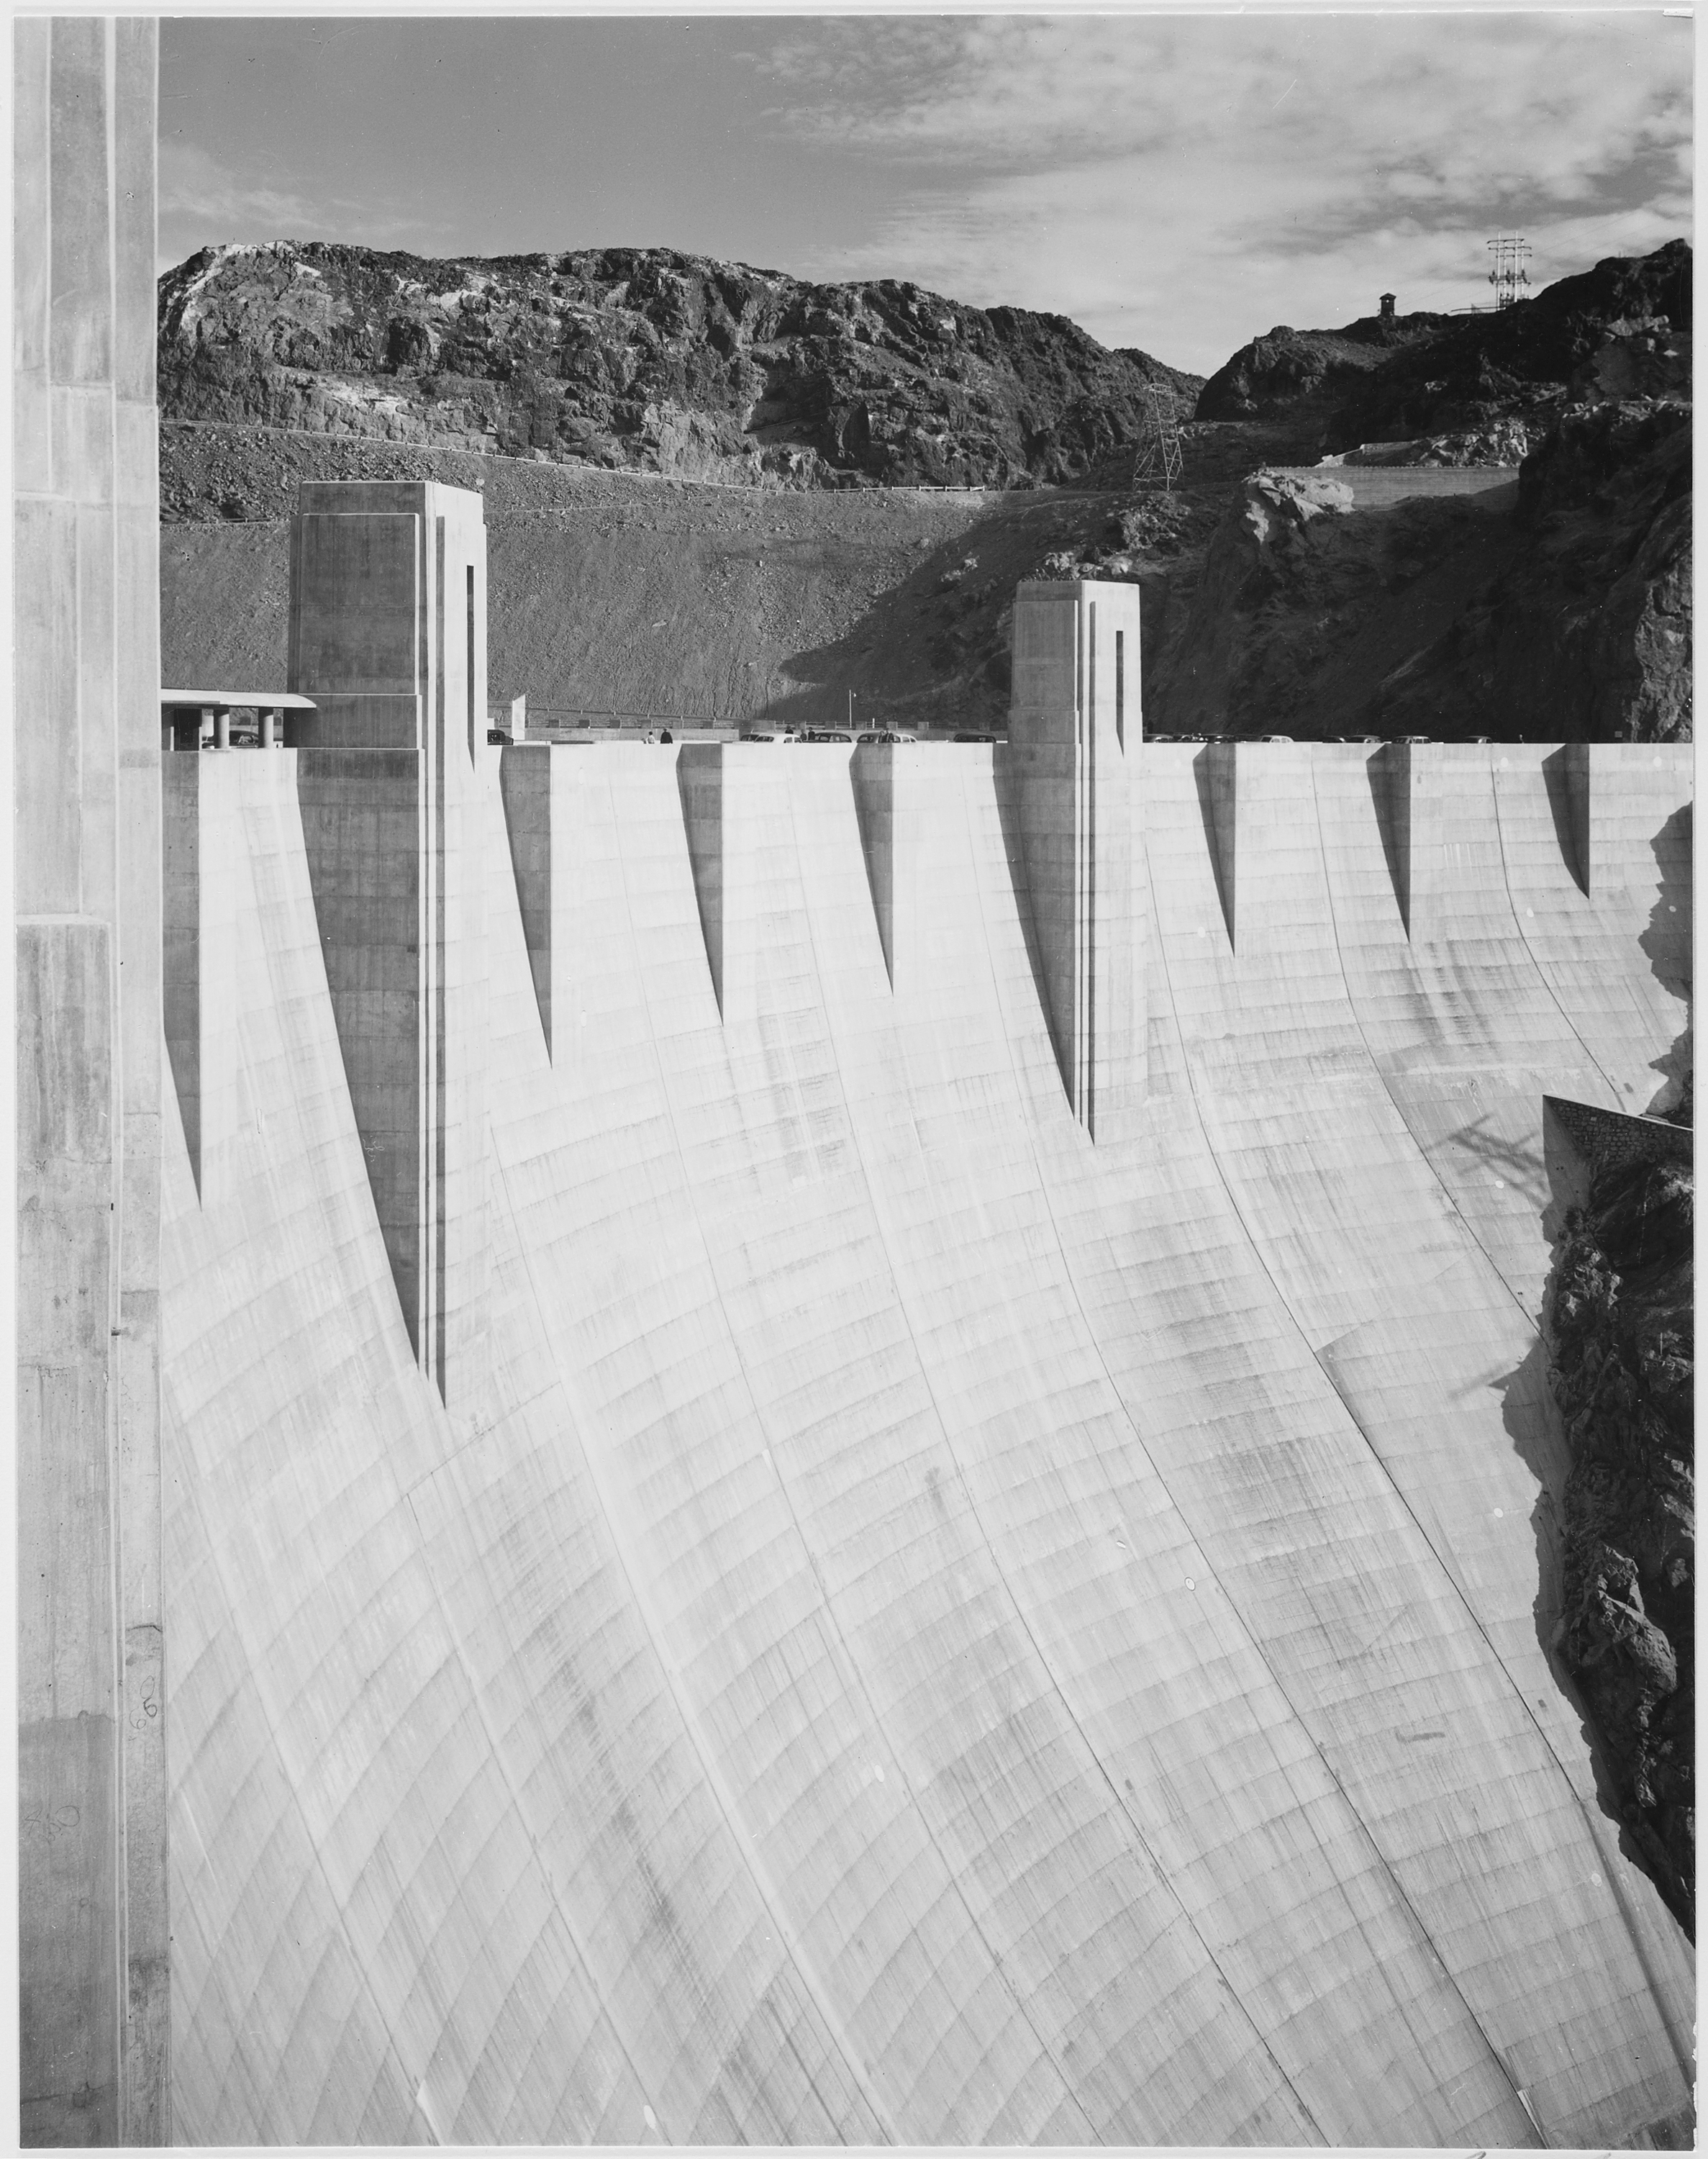 Ansel Adams - National Archives 79-AAB-04